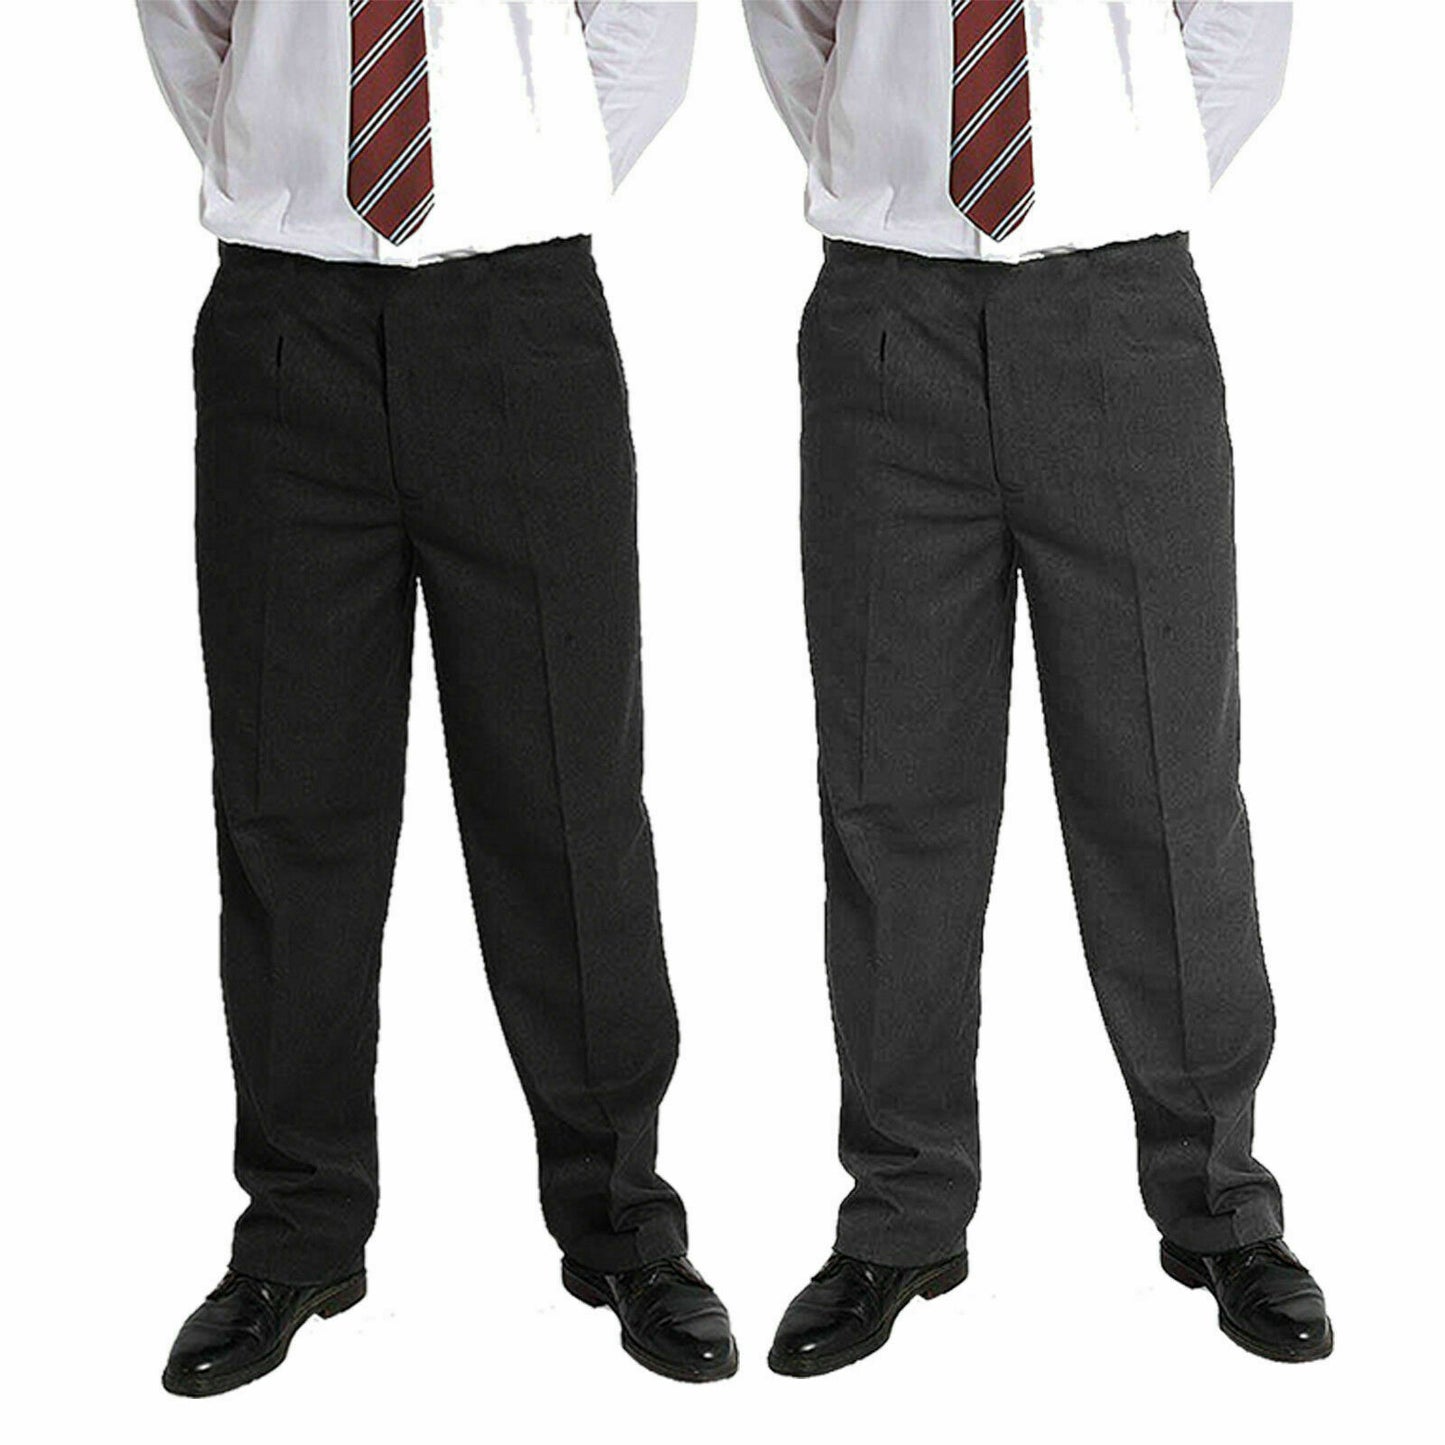 BOYS KIDS CHILDREN BACK TO SCHOOL QUALITY UNIFORM TROUSERS PANTS AGE 1 TO 13